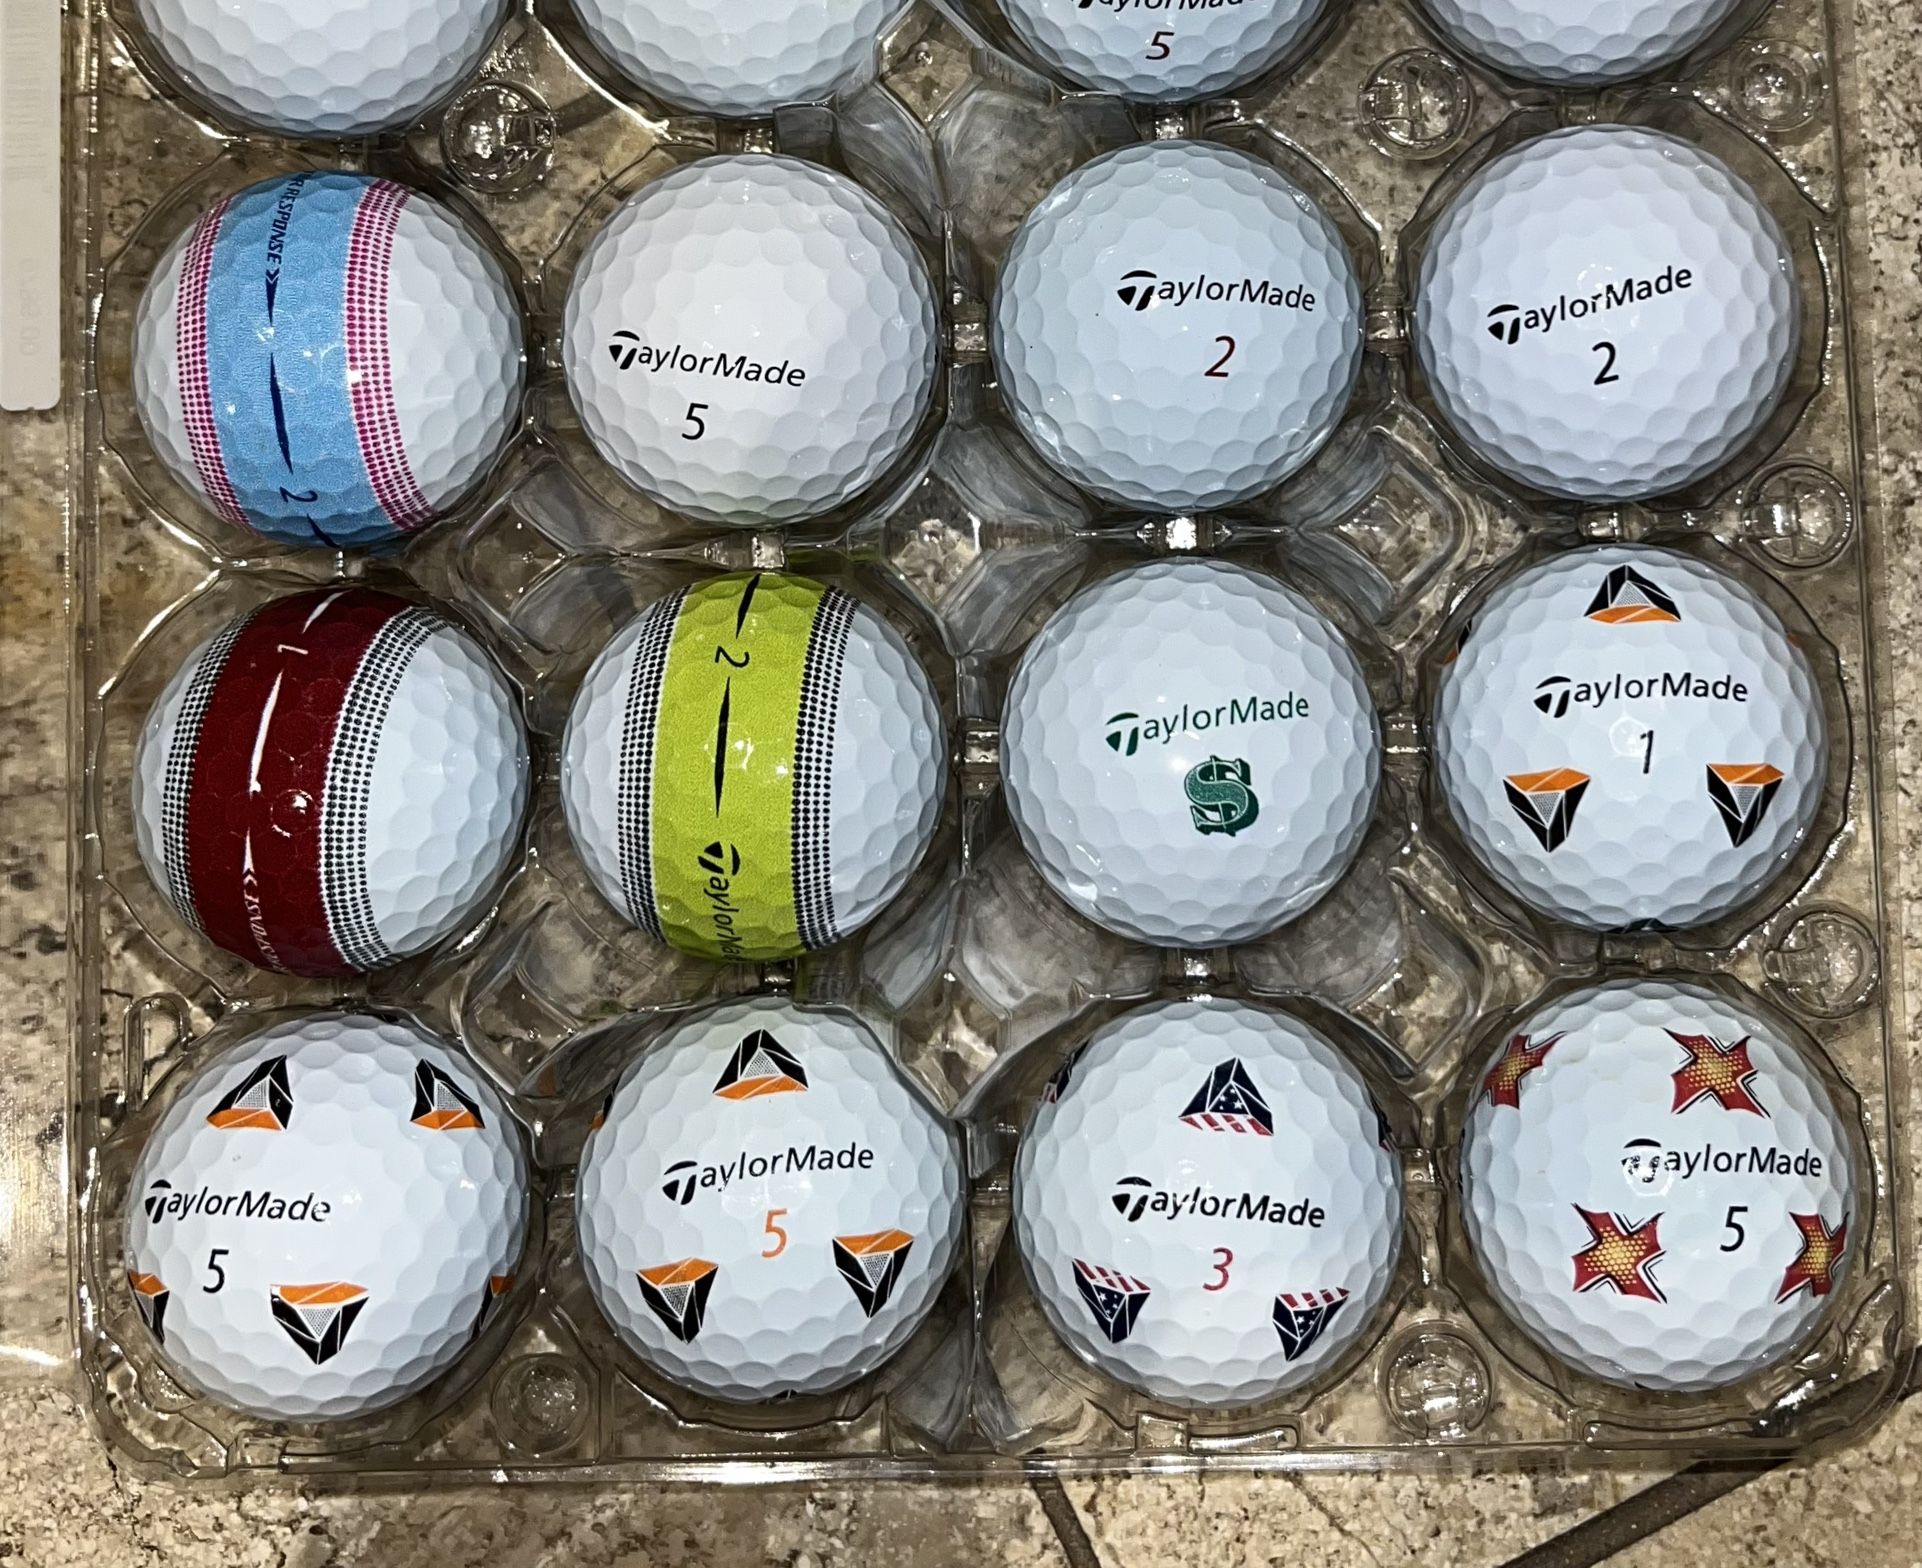 24 TaylorMade golf Balls As Pictured most are TP5, TP5X,and tour response ——